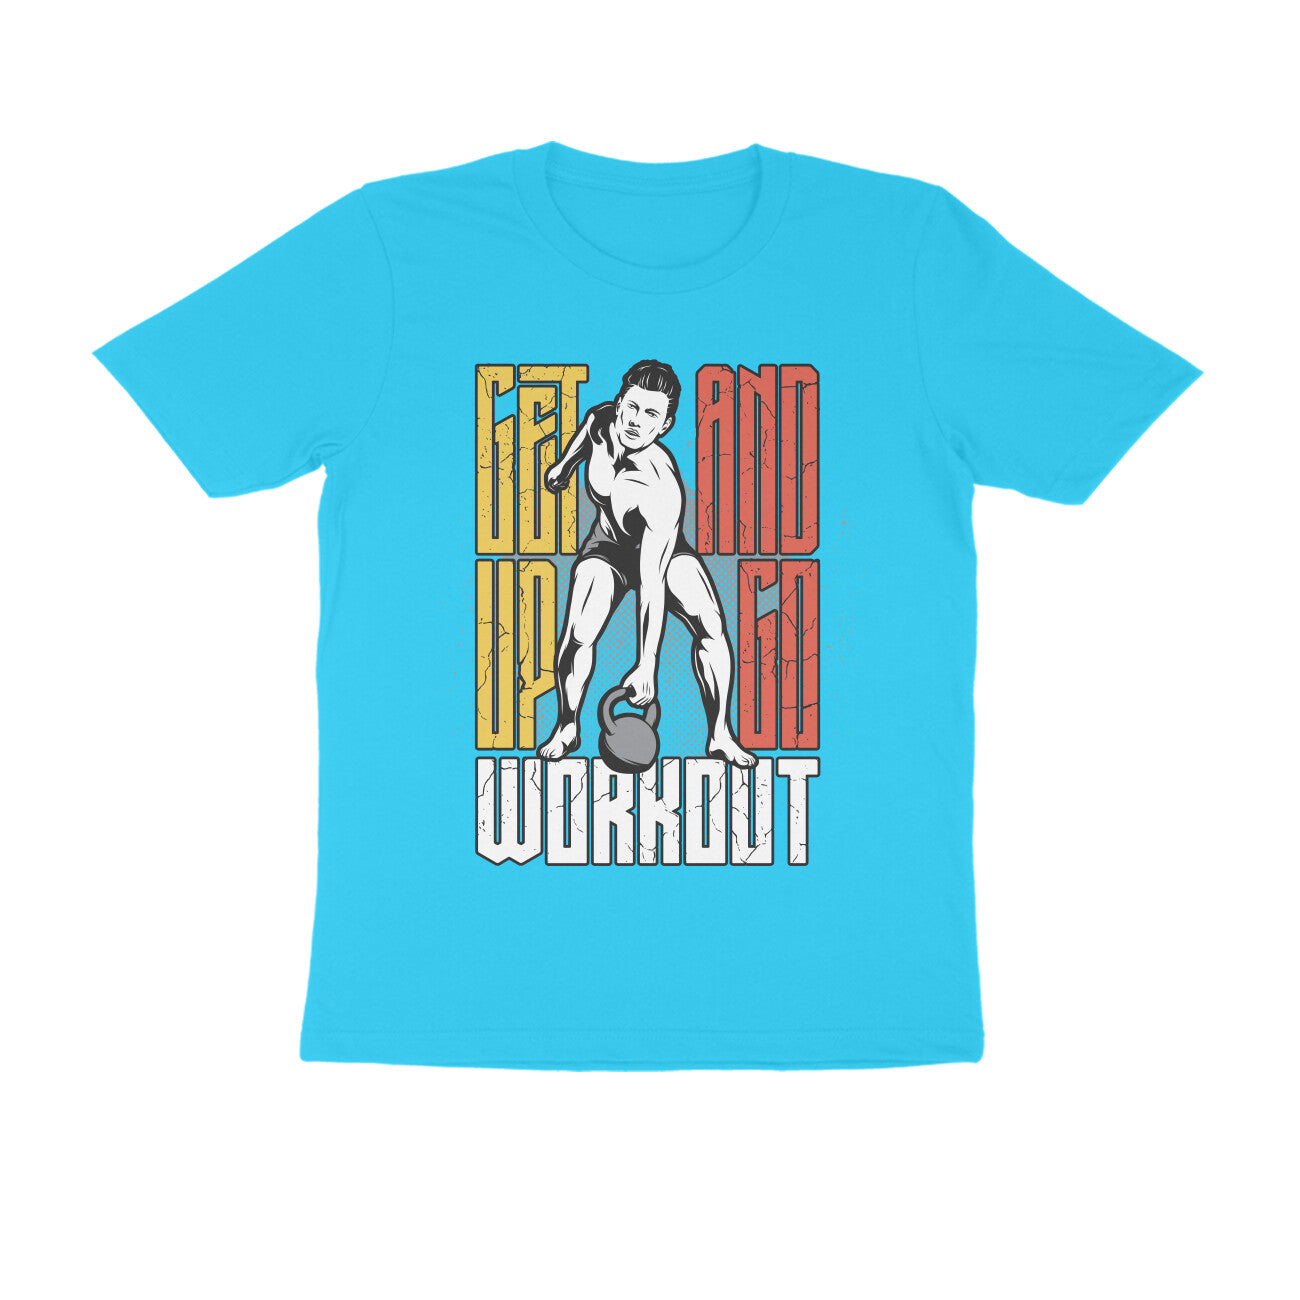 "Get up and Go Workout" - Kettlebell Swing Workout enthusiast T-Shirt